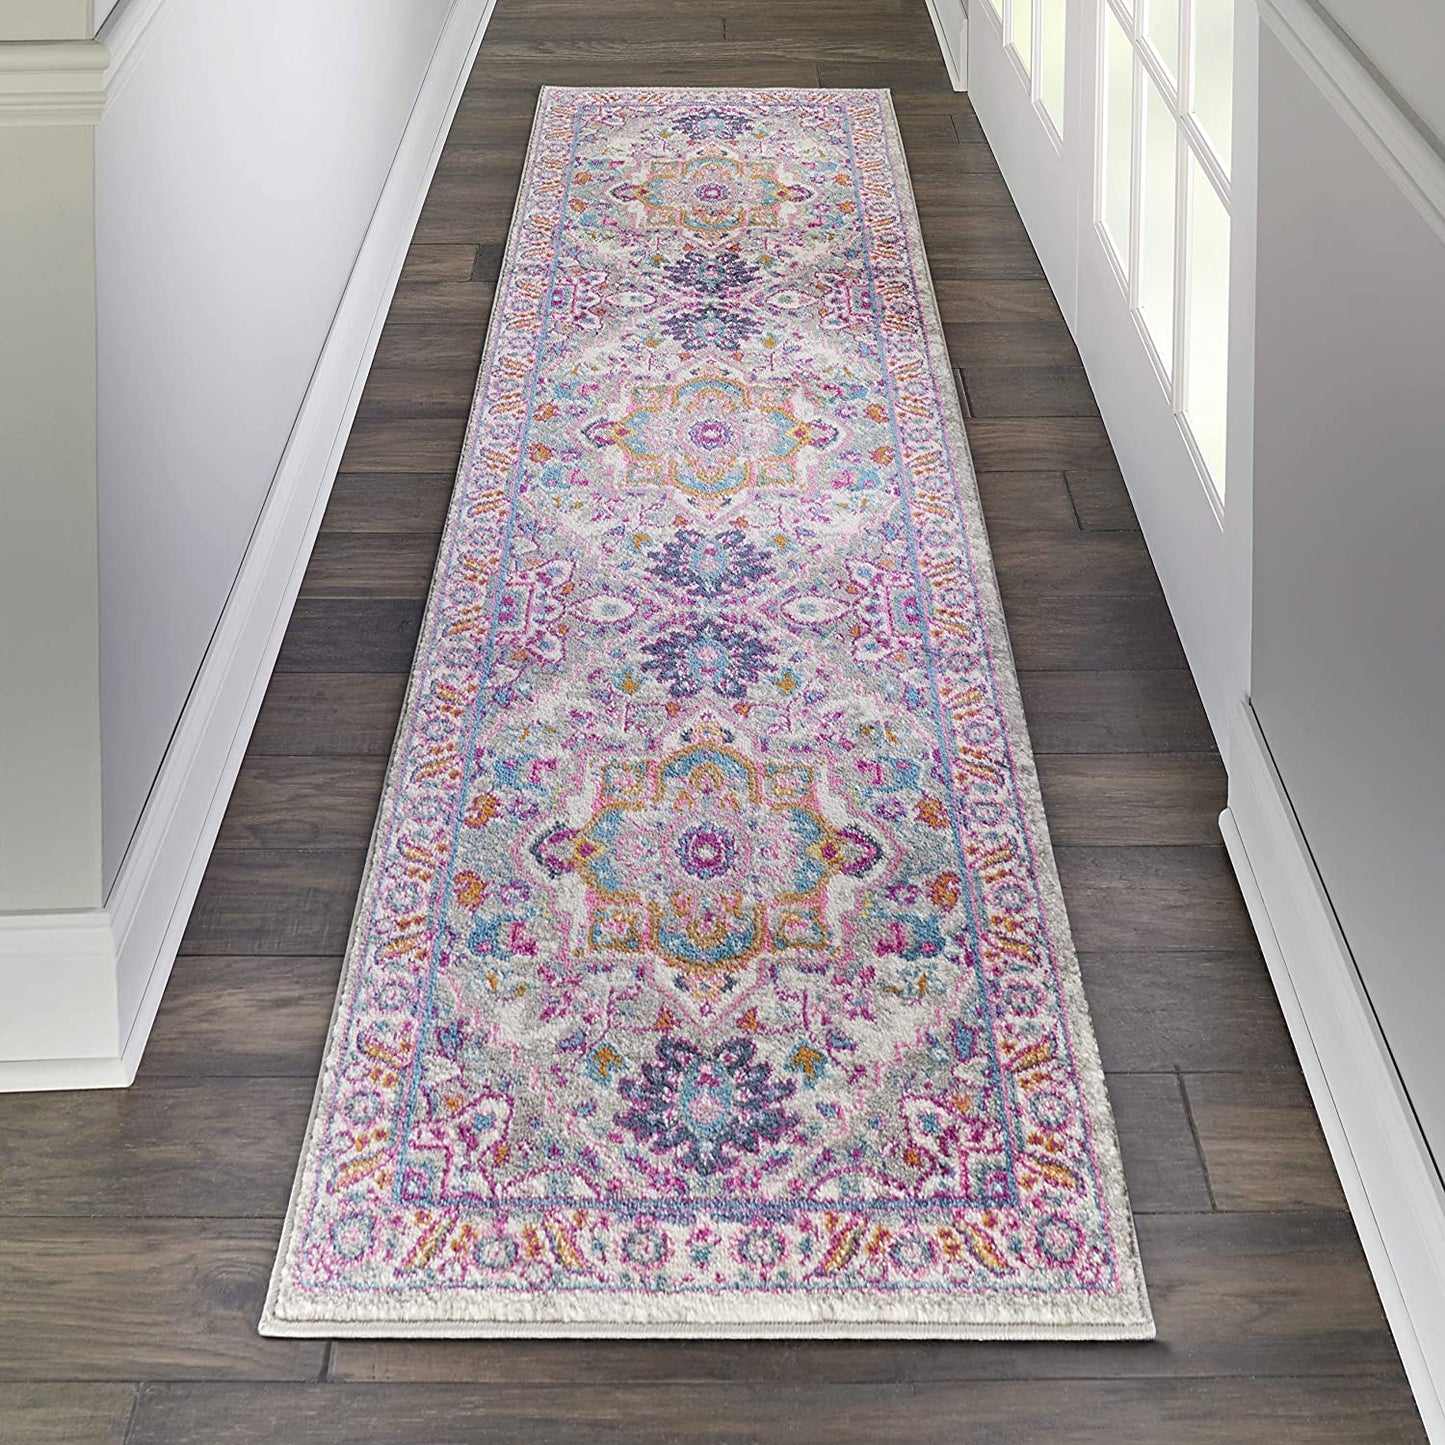 Passion Persian Colorful Light Grey/Pink Soft Area Rug